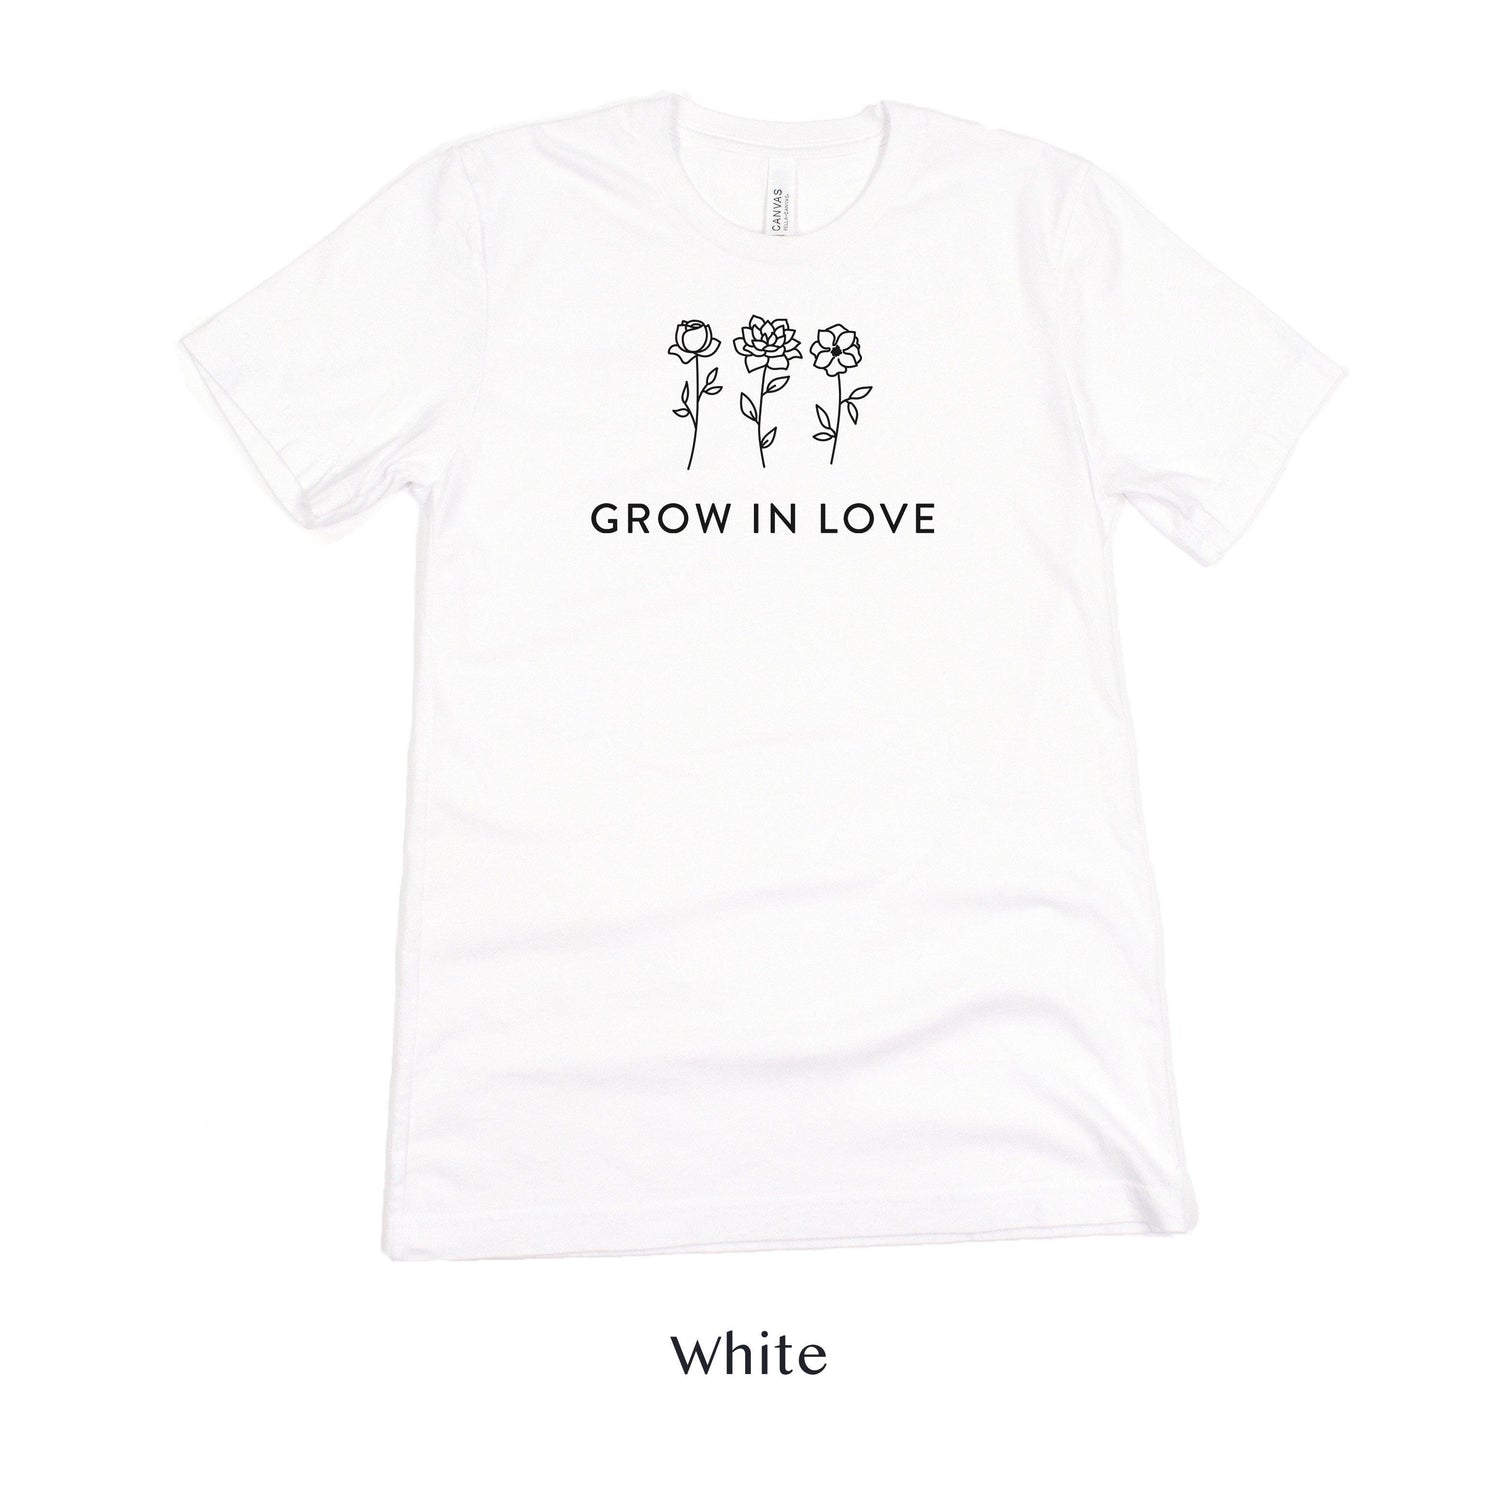 Grow in Love Short-Sleeve Tee - Plus Sizes Available! by Oaklynn Lane